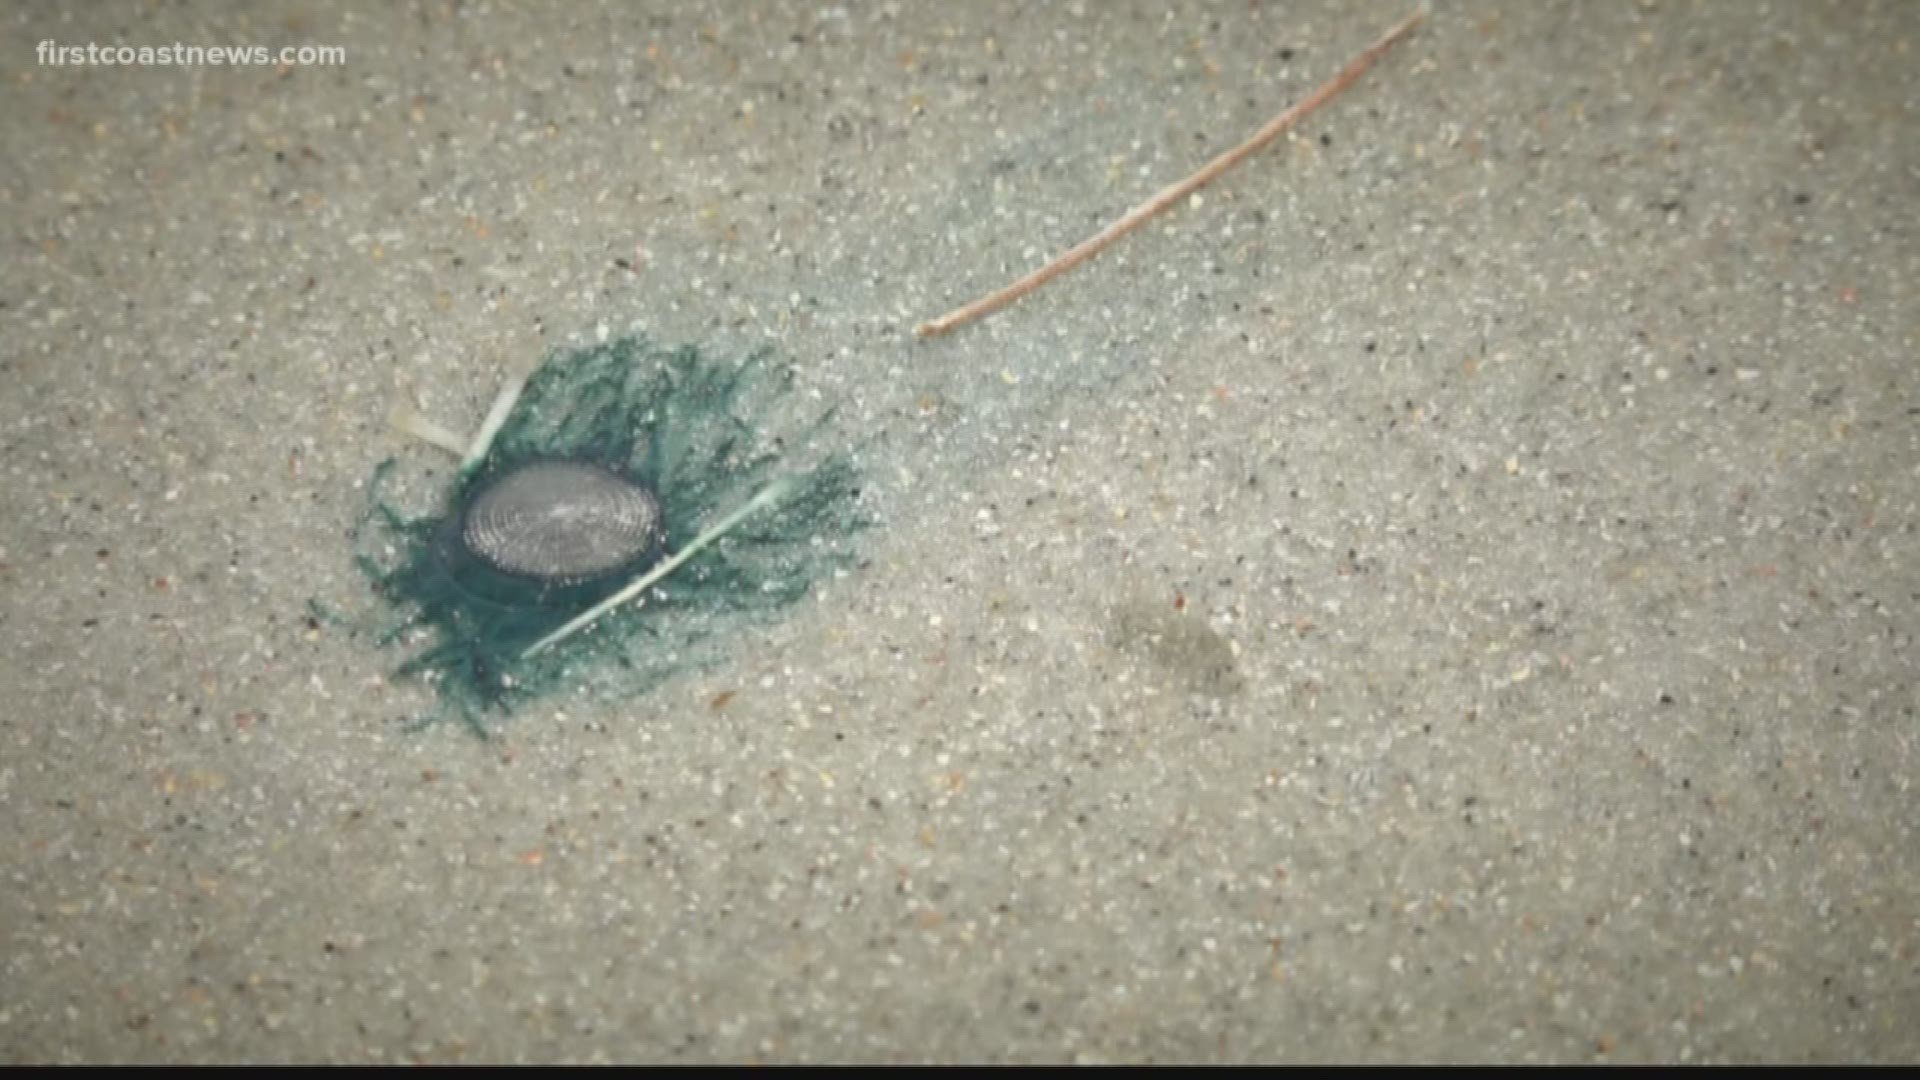 Have you noticed the tiny, blue, jellyfish-like creatures washing ashore on Jacksonville's beaches? They're called Blue Buttons and they're not actually jellyfish.